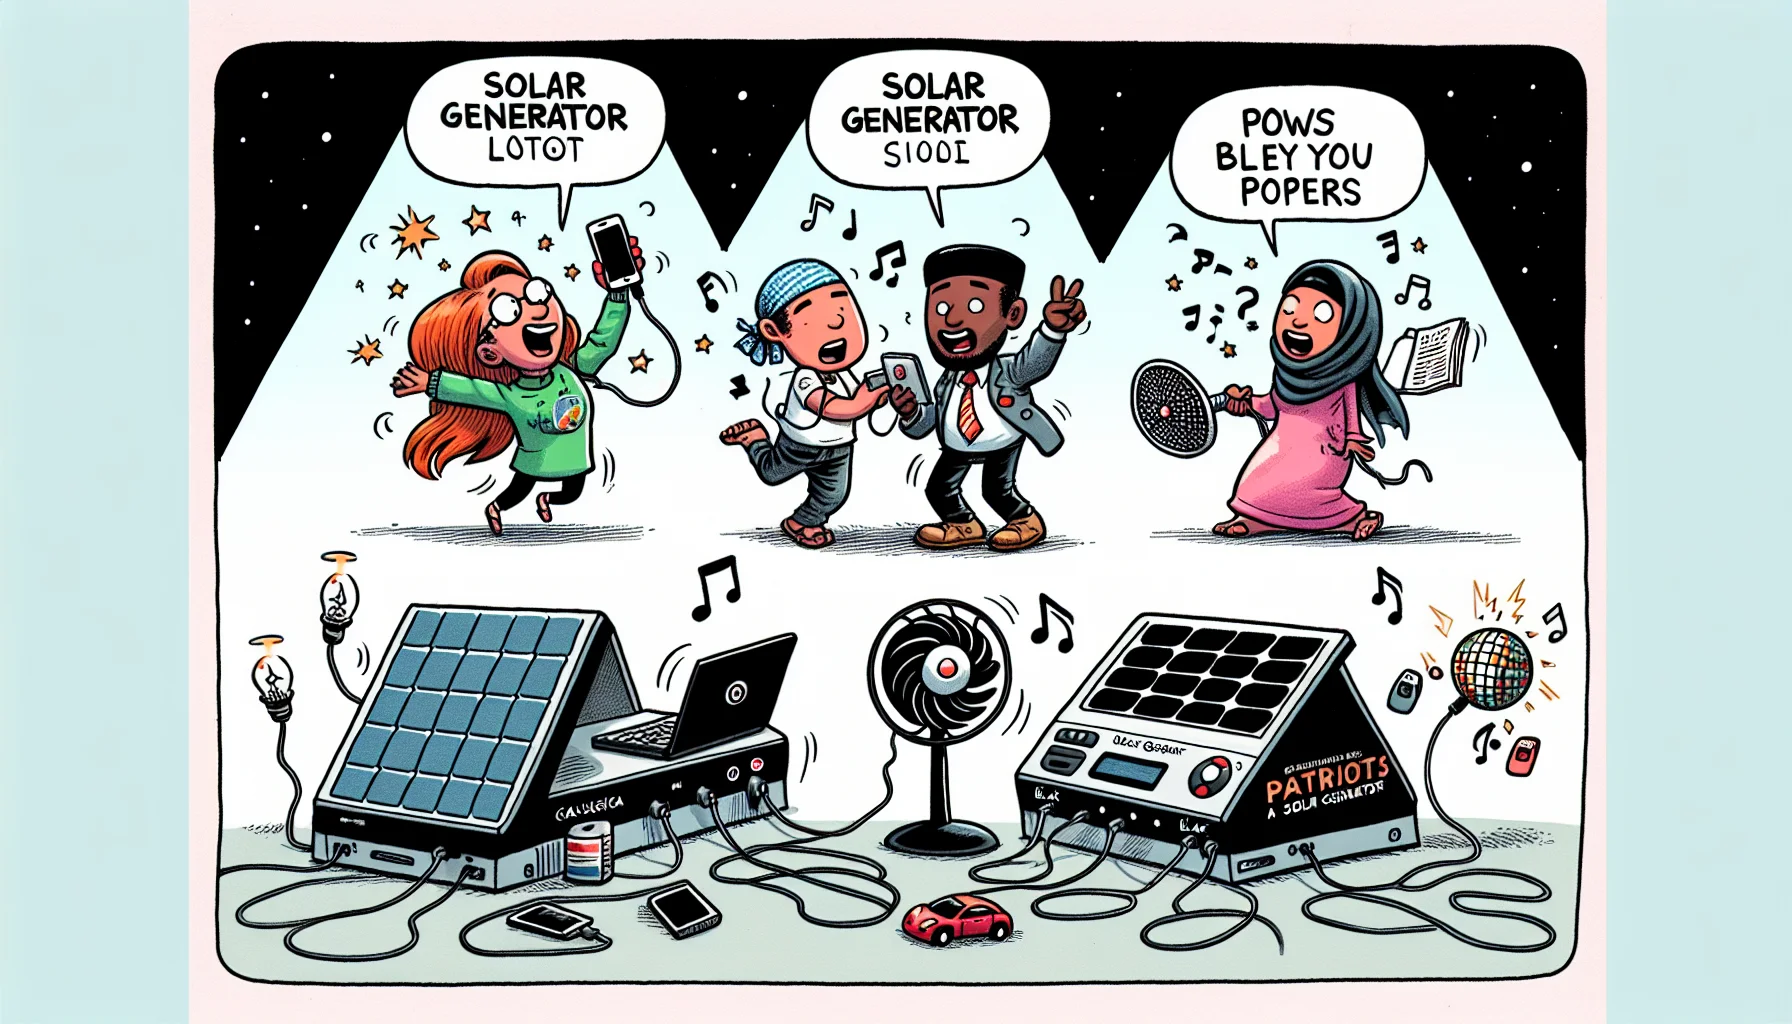 Draw a humorous scene of a solar-generator comparison. In the image, we see four cartoon-like individuals, each representing a different racial group (Caucasian, Hispanic, Black, Middle-Eastern). They are gathered around four different solar generators, each branded with the emblem 'Patriots'. The Caucasian woman is trying to power her laptop with the generator but instead, inadvertently turns on a disco ball. The Hispanic man is plugging in a fan, only to blow away his papers. The Black male teenager tries to charge his phone but instead, a mini toy electric car zooms off. The Middle-Eastern woman attempts to power a radio, but it comically plays opera music instead of rock. These comedic mishaps are meant to highlight the fun in using these solar generators.